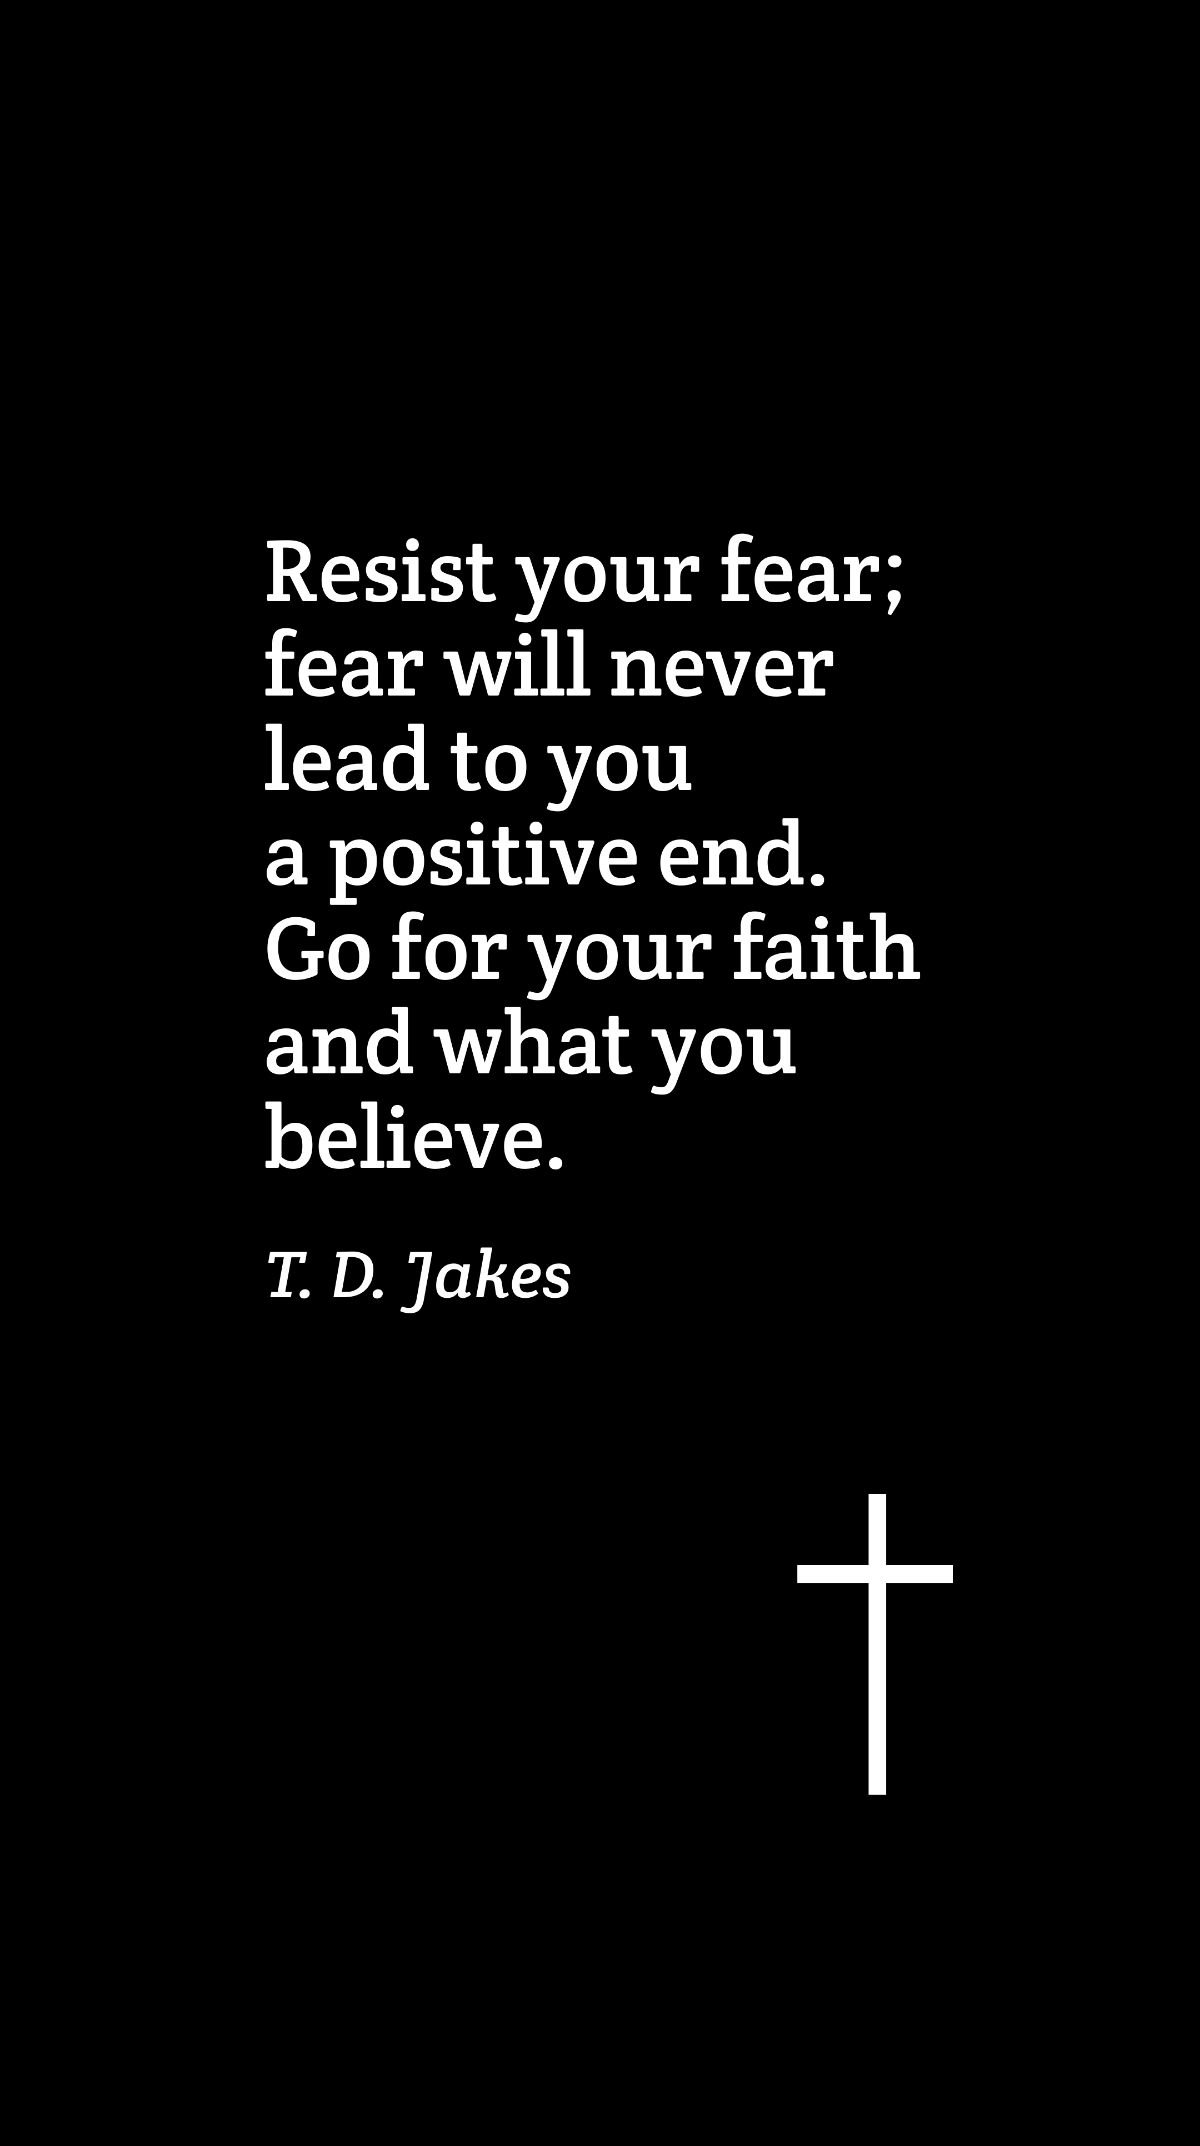 T. D. Jakes - Resist your fear; fear will never lead to you a positive end. Go for your faith and what you believe. Template